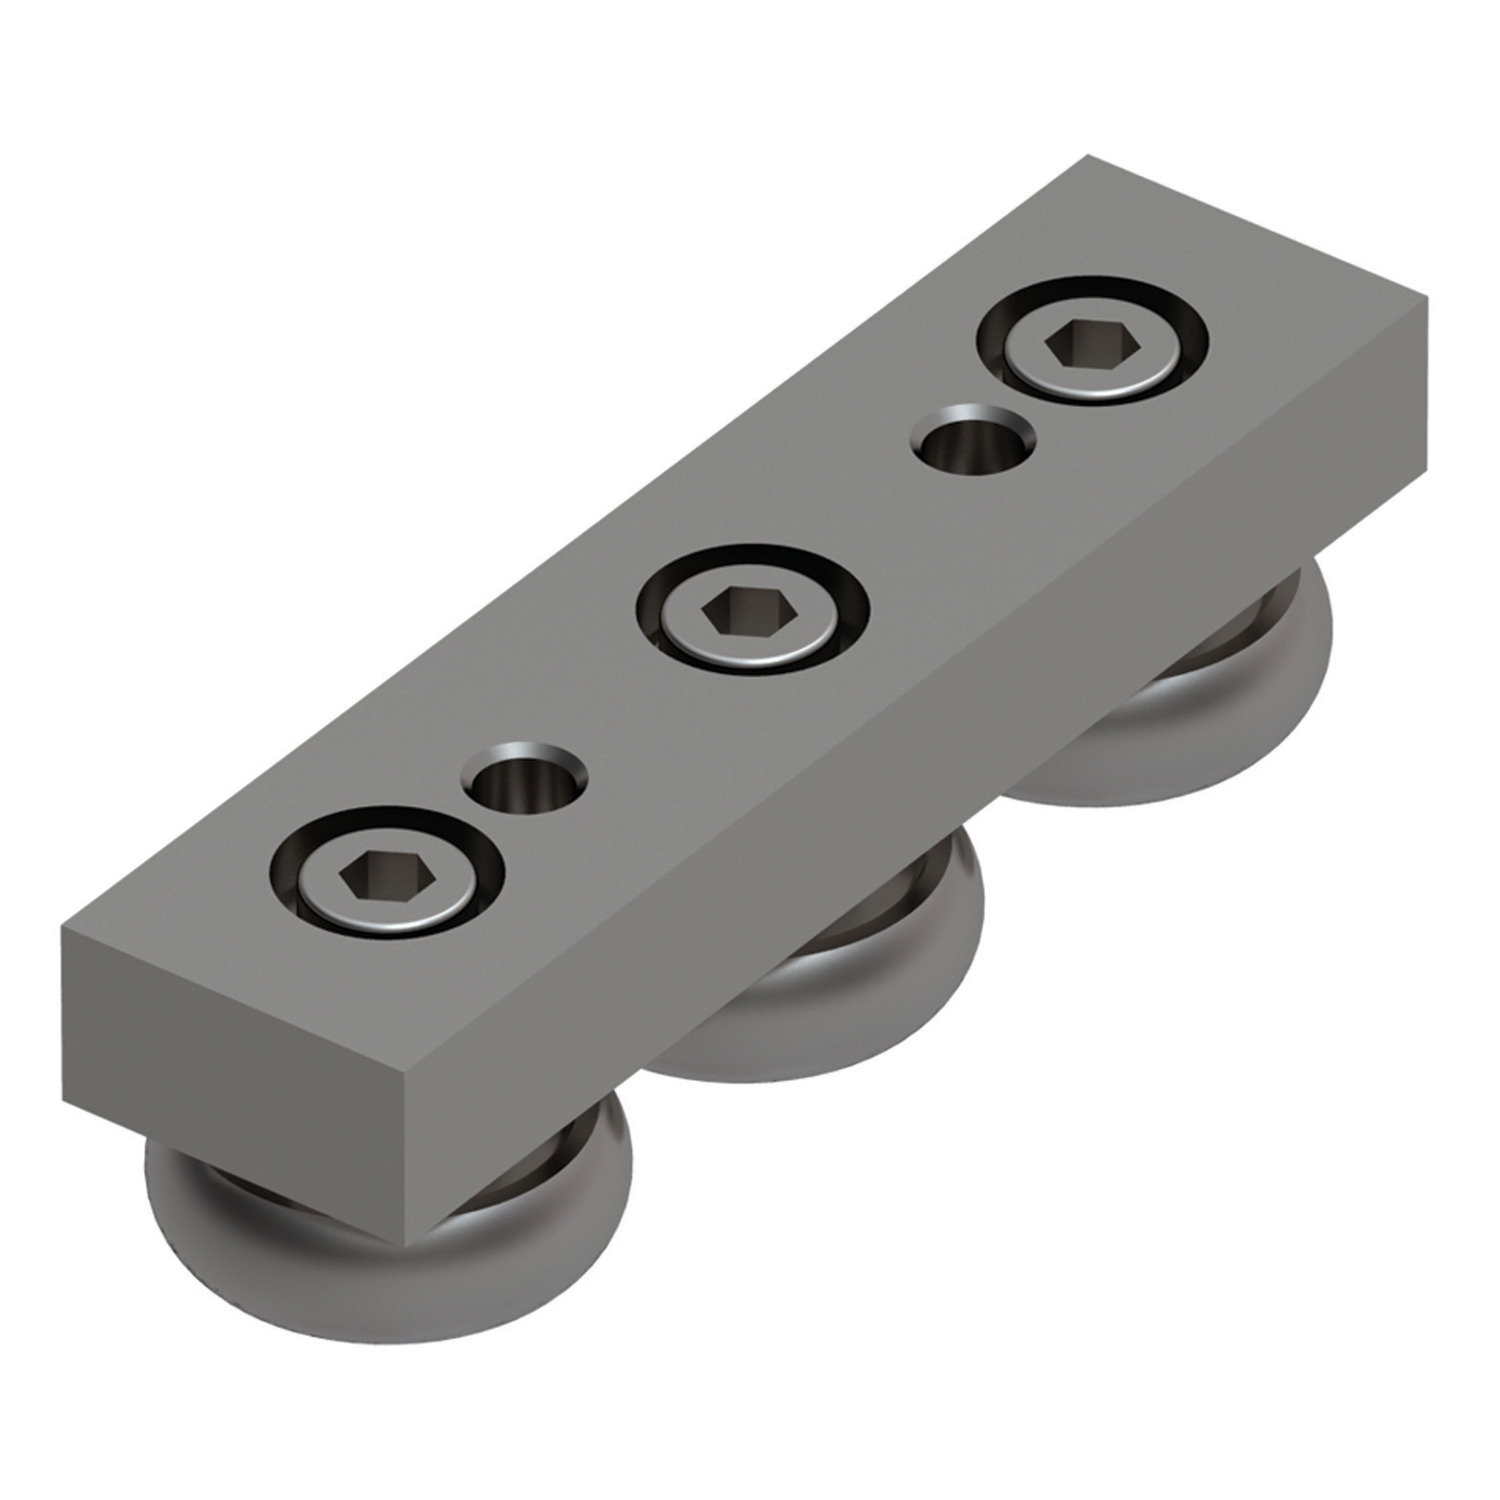 Stainless Rails Stainless steel A4, 316L) rail system can be used in wet environments (including sea water). Rubber seals protect the bearings. In 3 sizes to suit required load ratings.